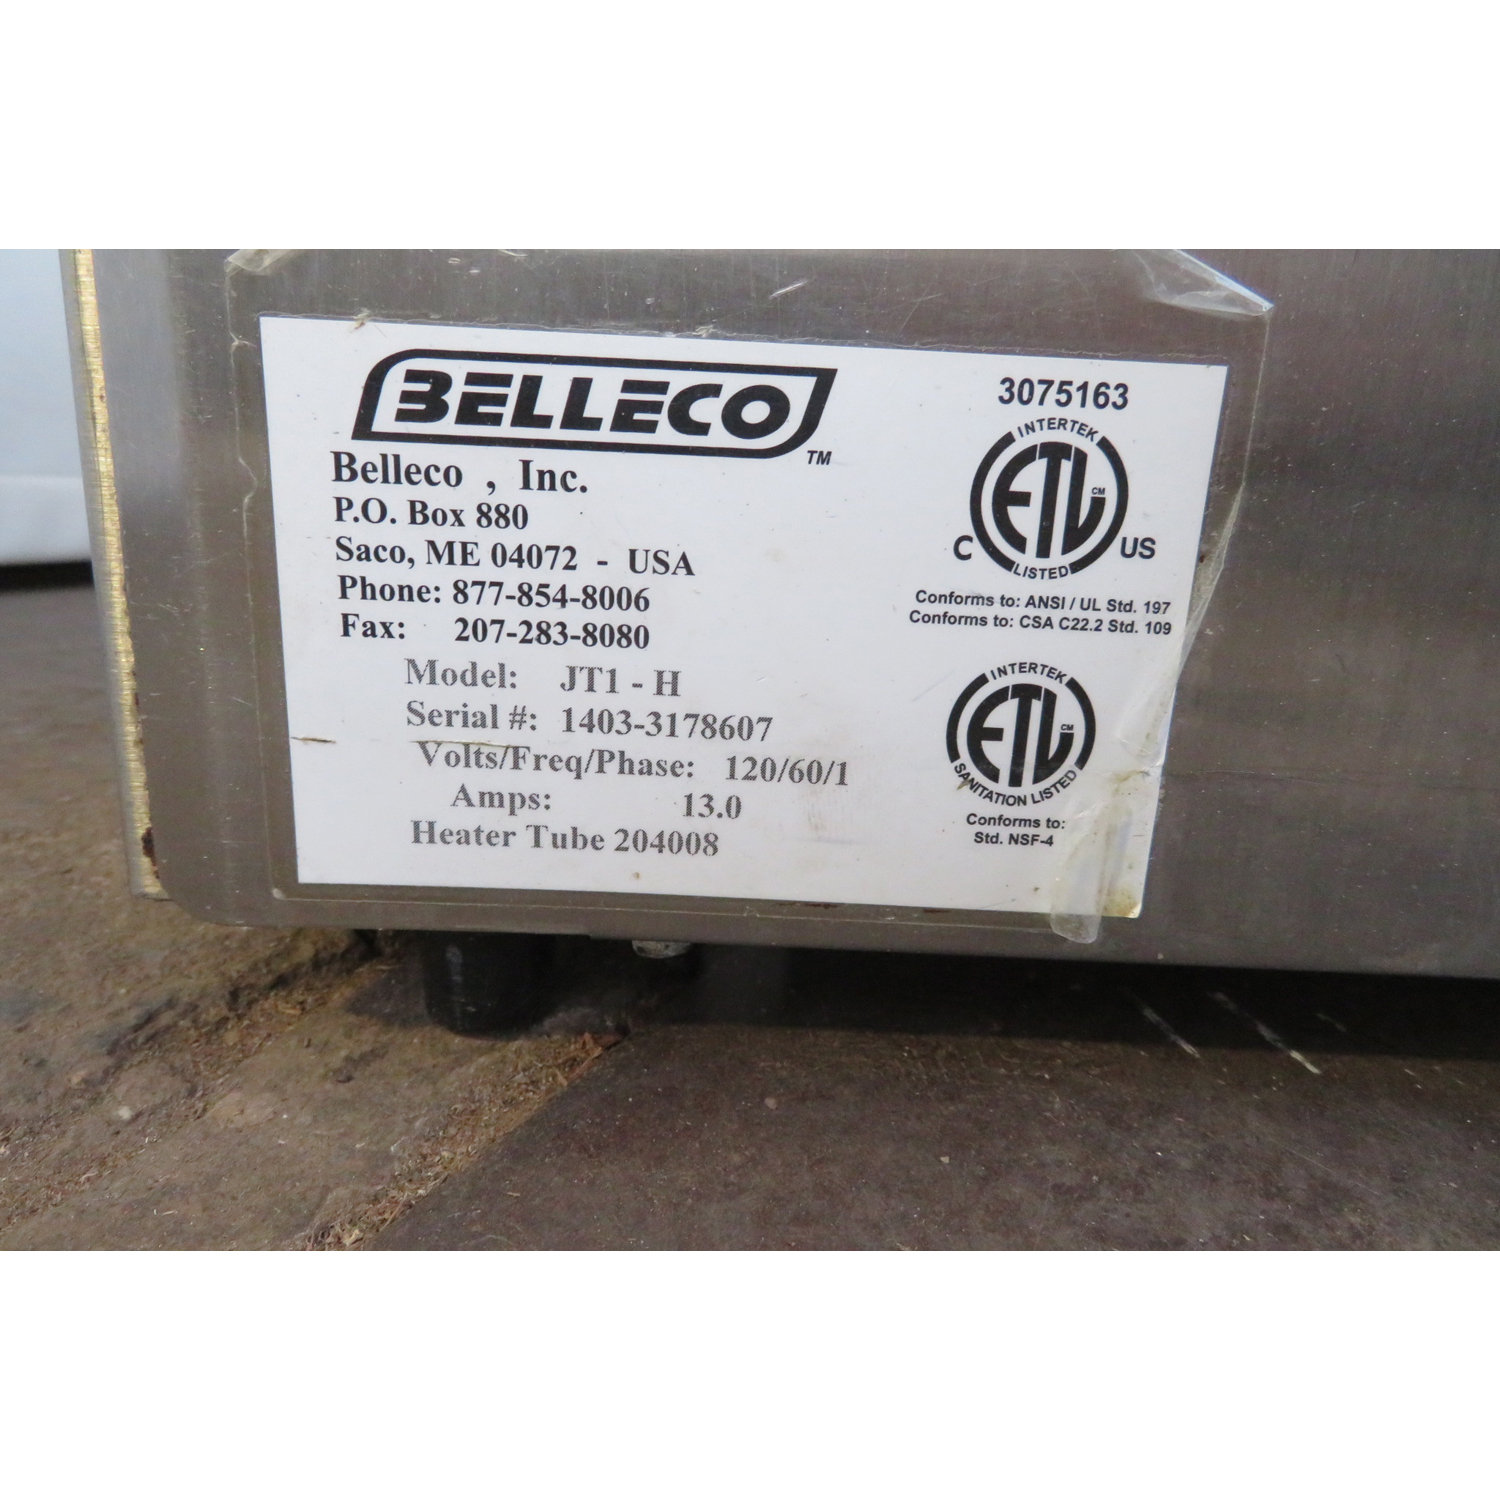 Belleco JT1-H Conveyor Toaster 115V, Used Excellent Condition image 5